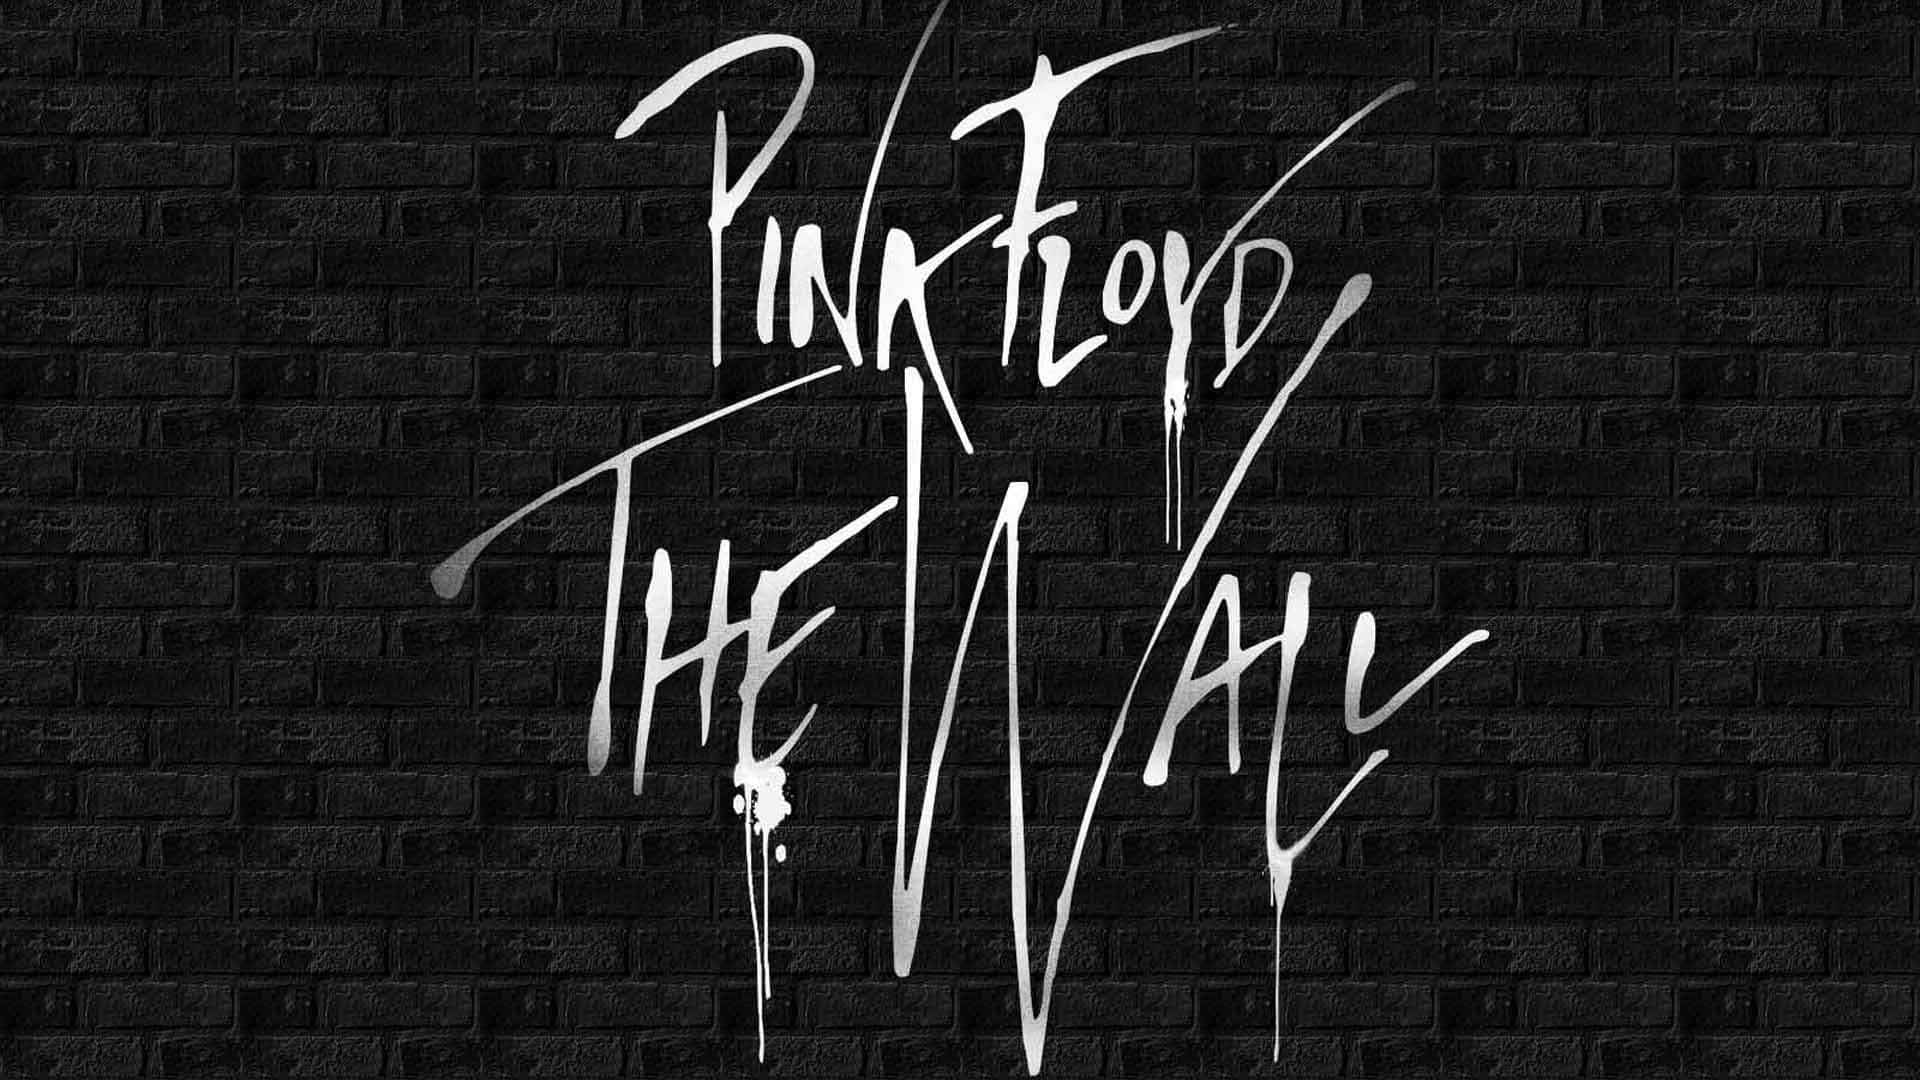 Pinkfloyd The Wall - Klassisches Rock-albumcover Wallpaper